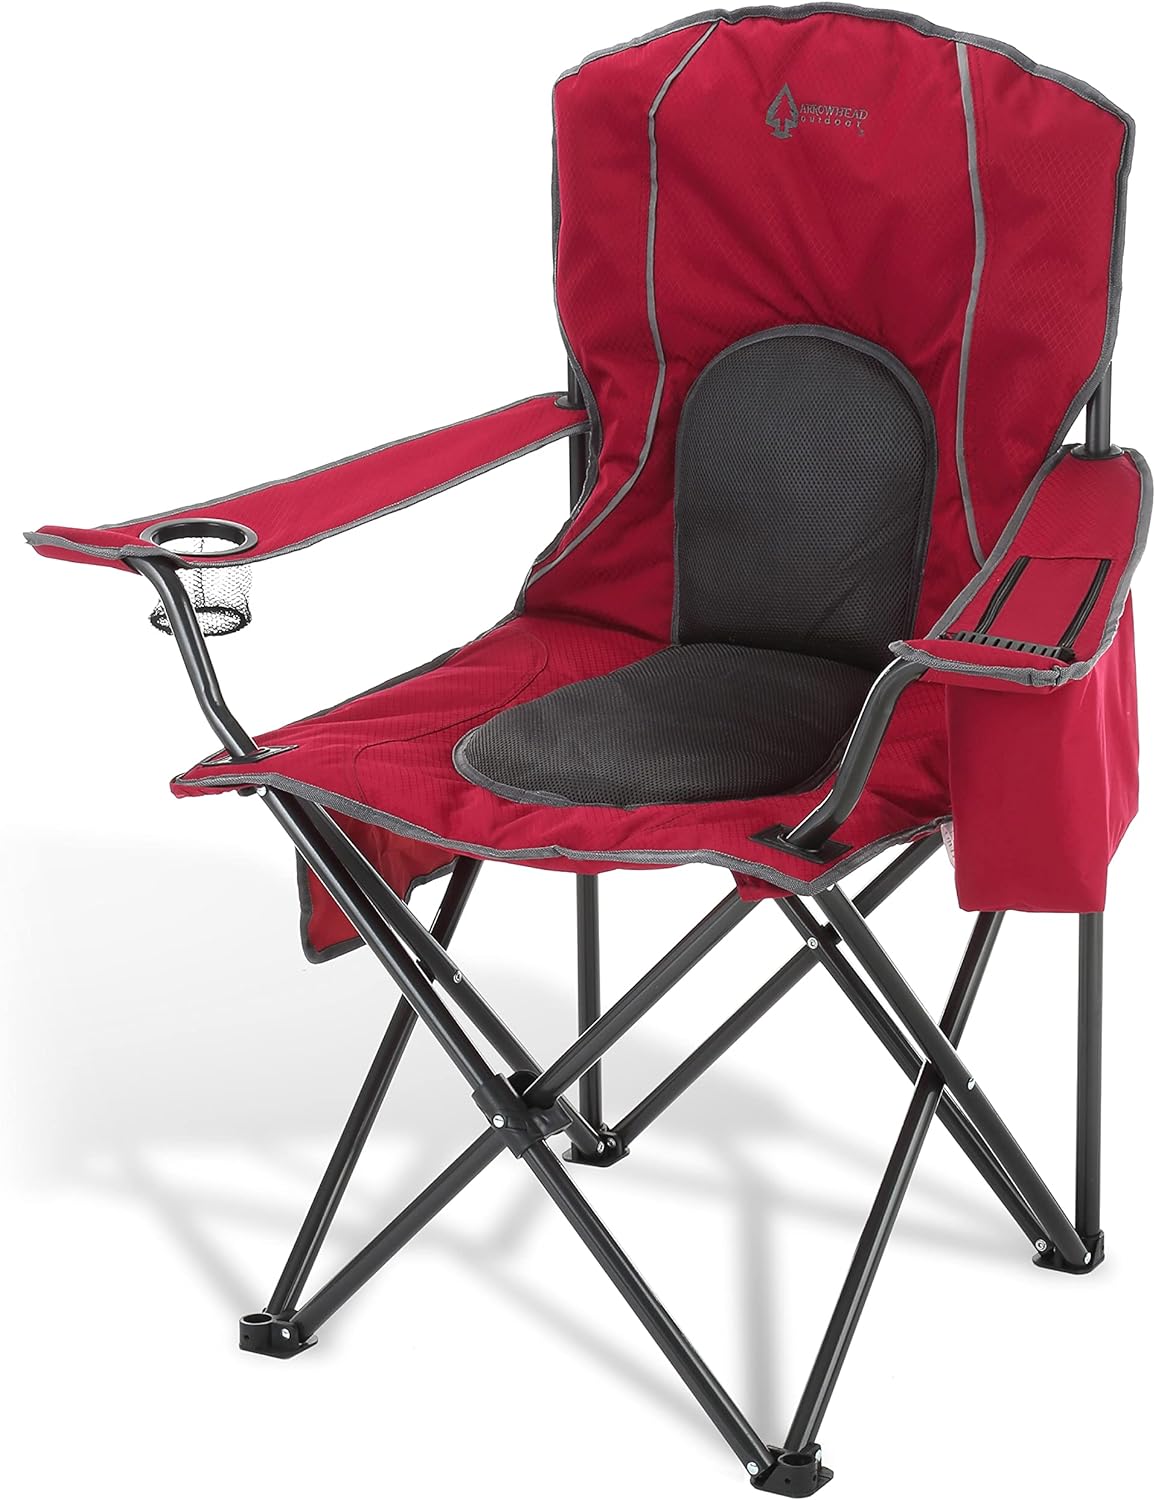 Arrowhead Outdoor Portable Folding Camping Quad Chair w/ 4-Can Cooler, Cup-Holder, Heavy-Duty Carrying Bag, Padded Armrests, Sup